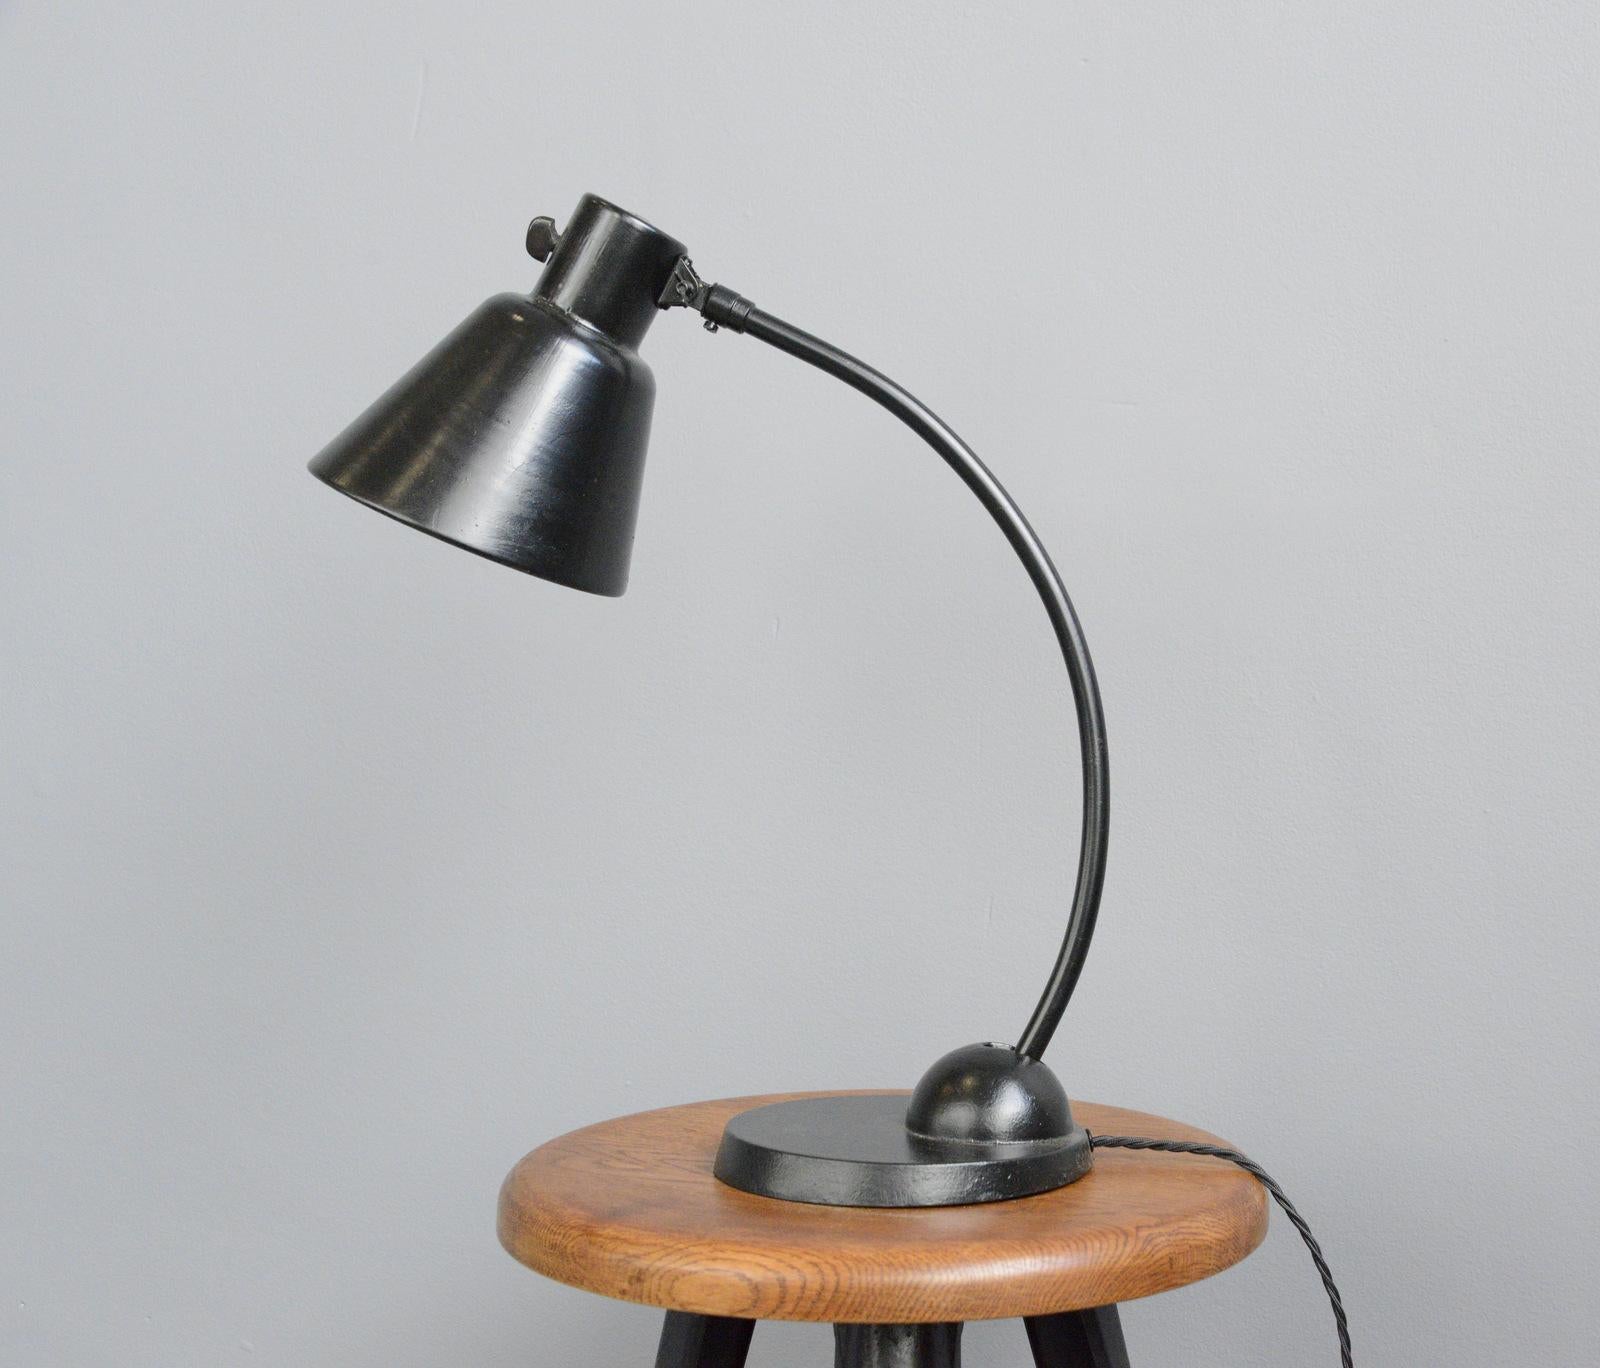 Bauhaus table lamp by Schaco, circa 1930s

- Cast iron base
- Adjustable curved arm
- Adjustable steel shade
- On/Off toggle switch on the shade
- Relief 